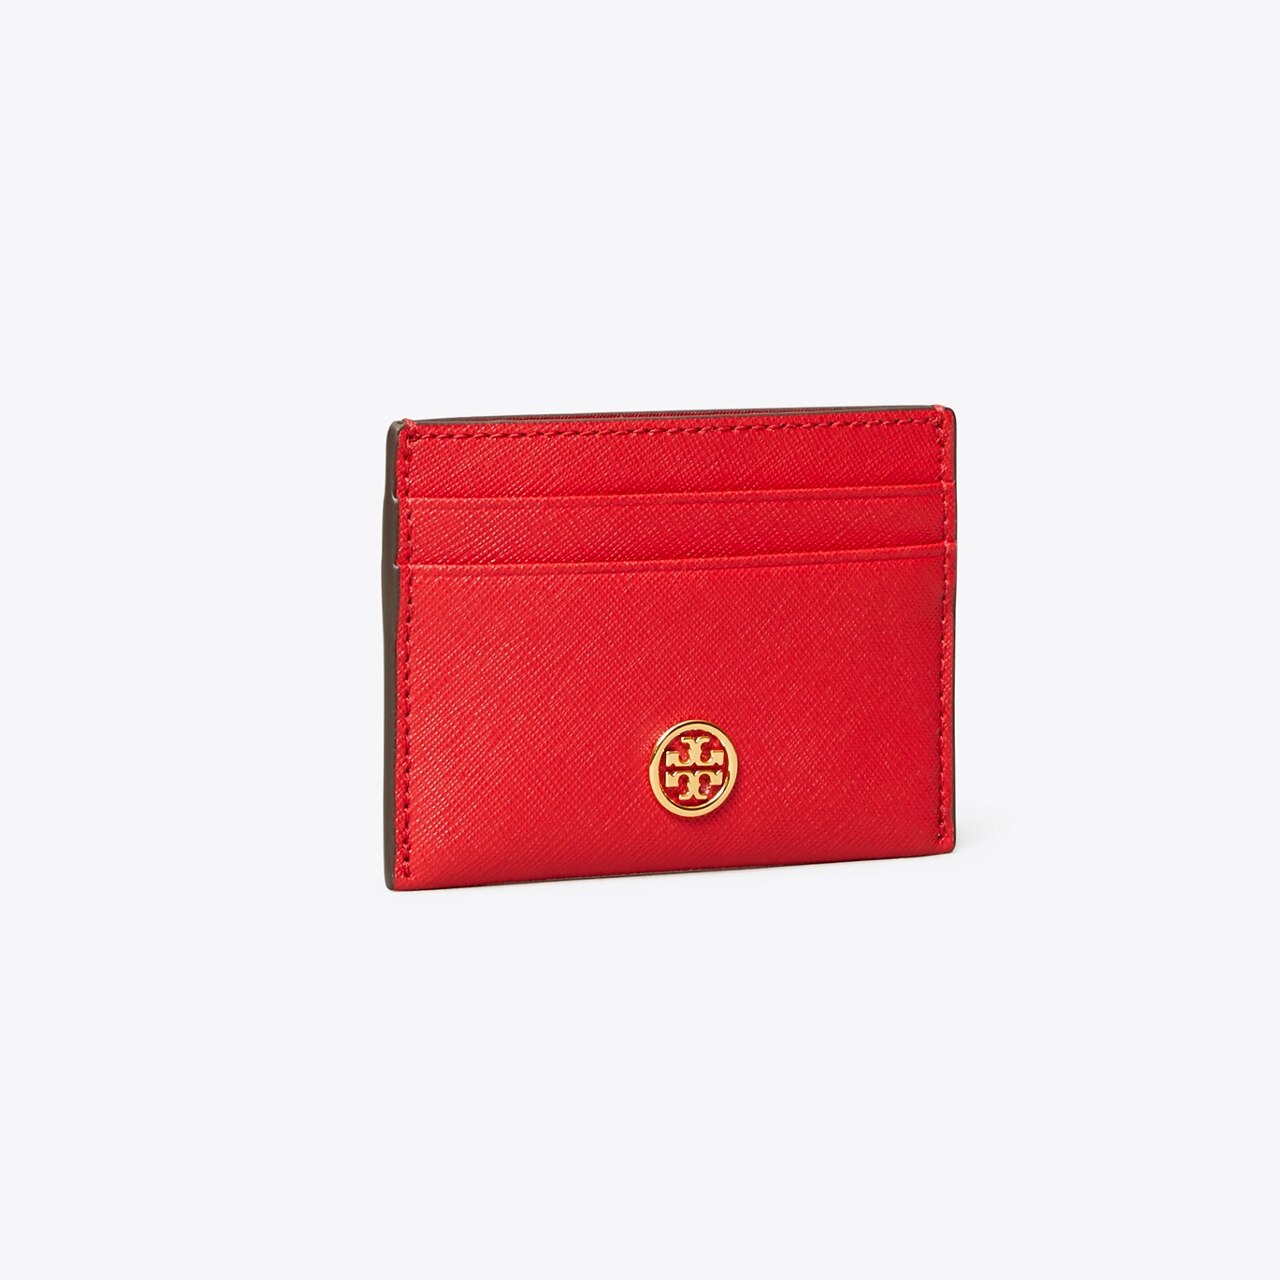 Tory Burch Robinson Leather Card Case